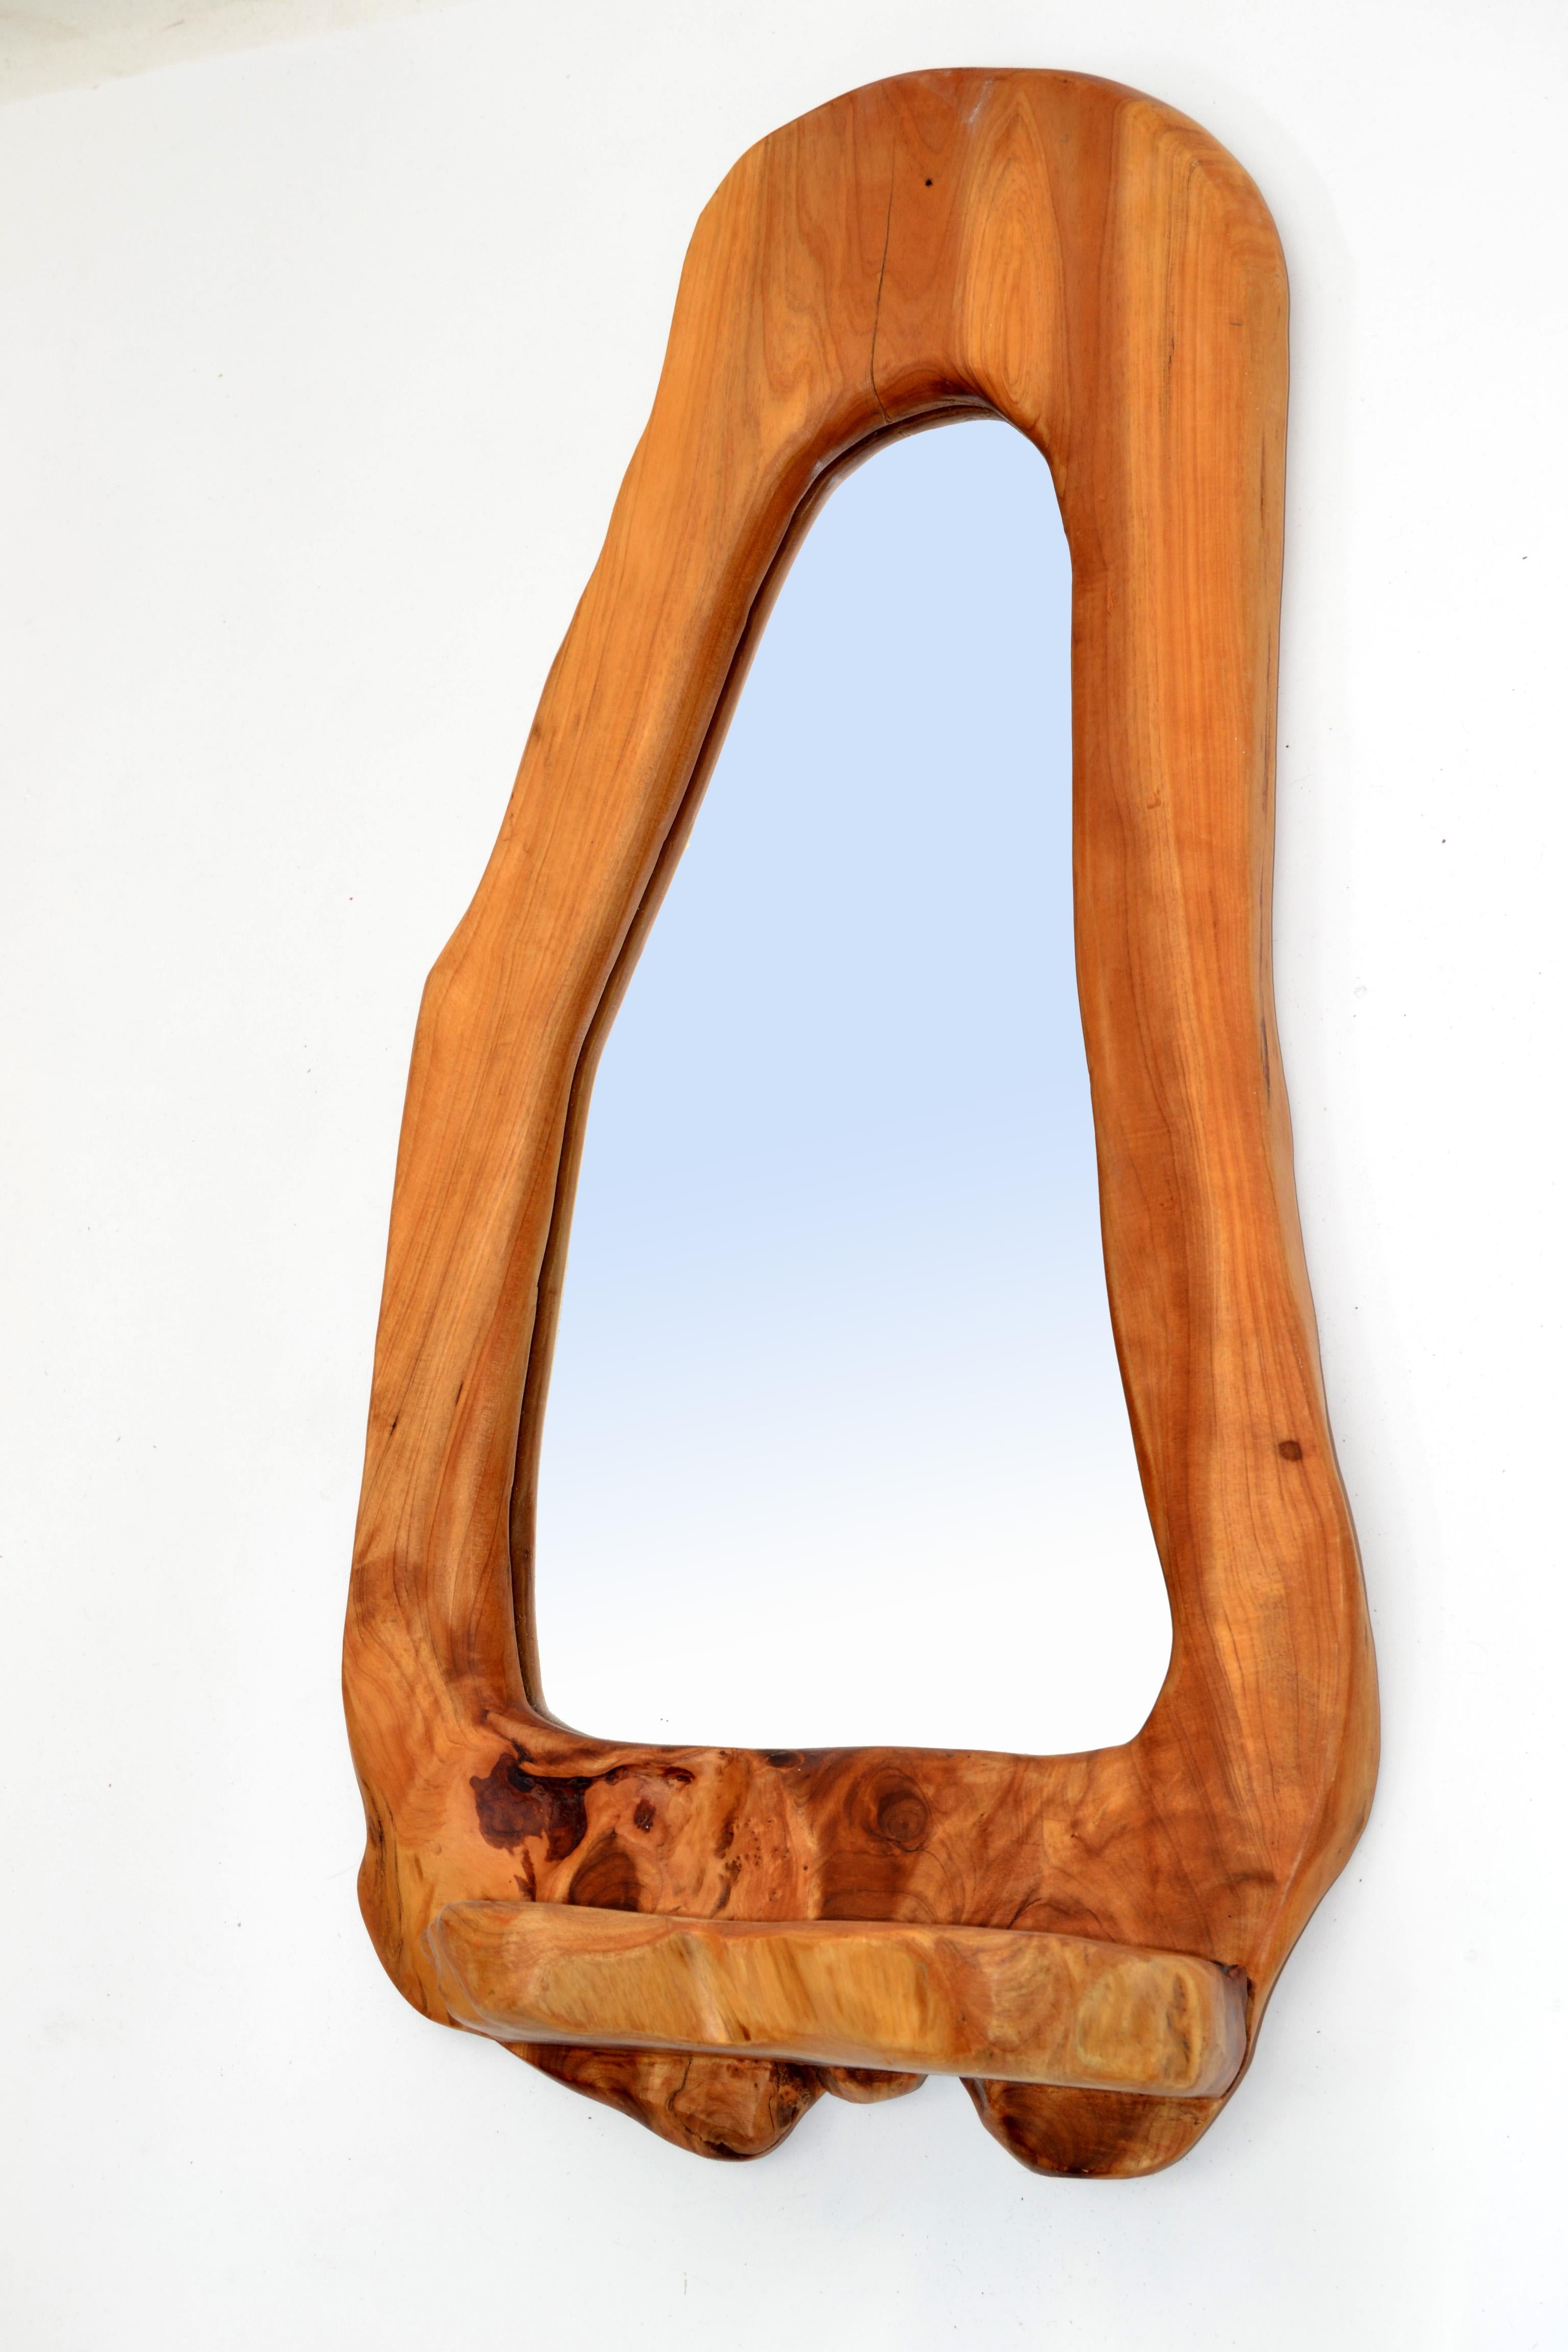 Mid-Century Modern American Organic Burl Wood rectangular wall mirror from the 1970s.
Amazingly handcrafted burl wood grain bordered the central mirror.
Mirror size: 7.5 inches x 15 inches.